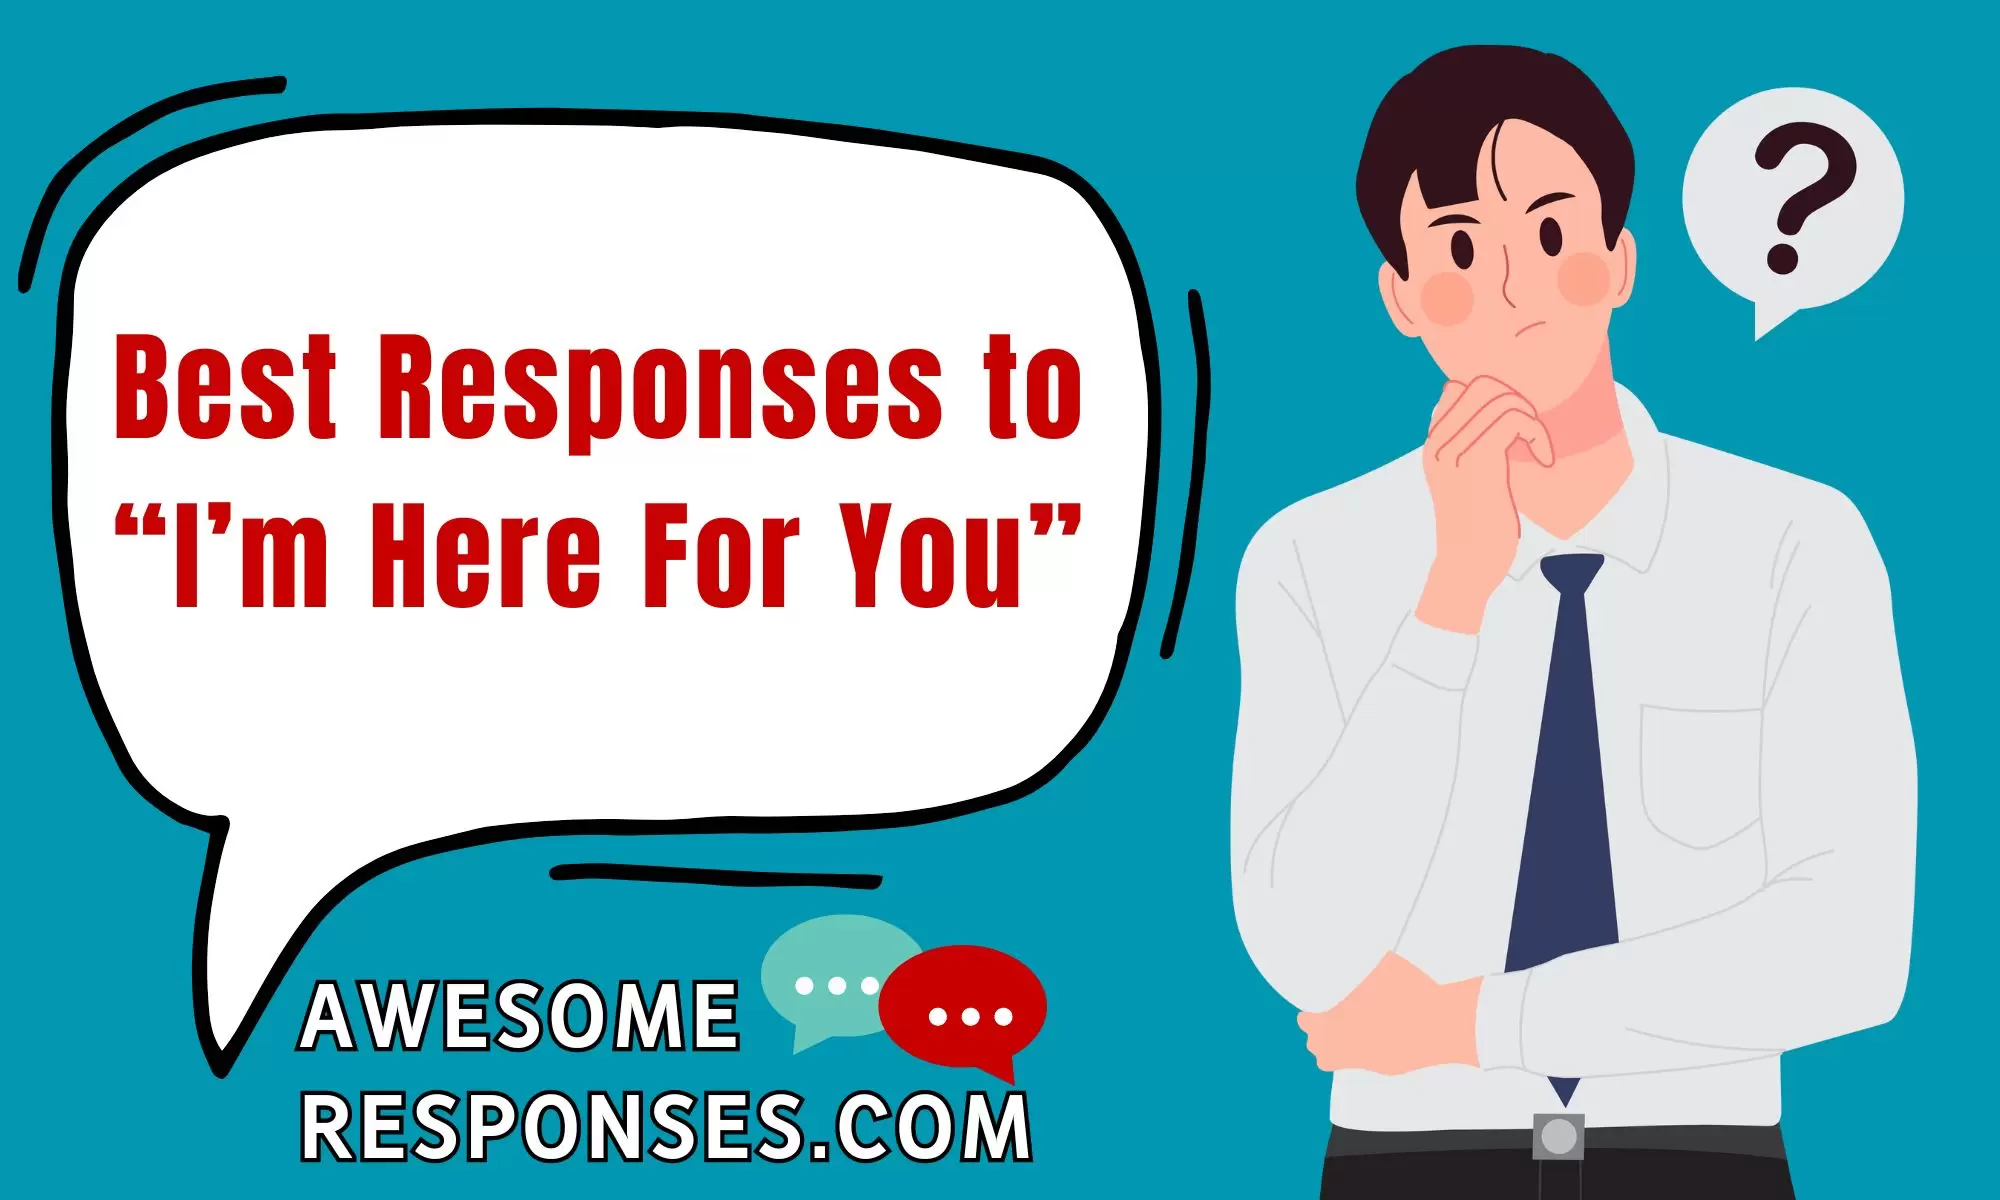 Best Responses to “I’m Here For You”